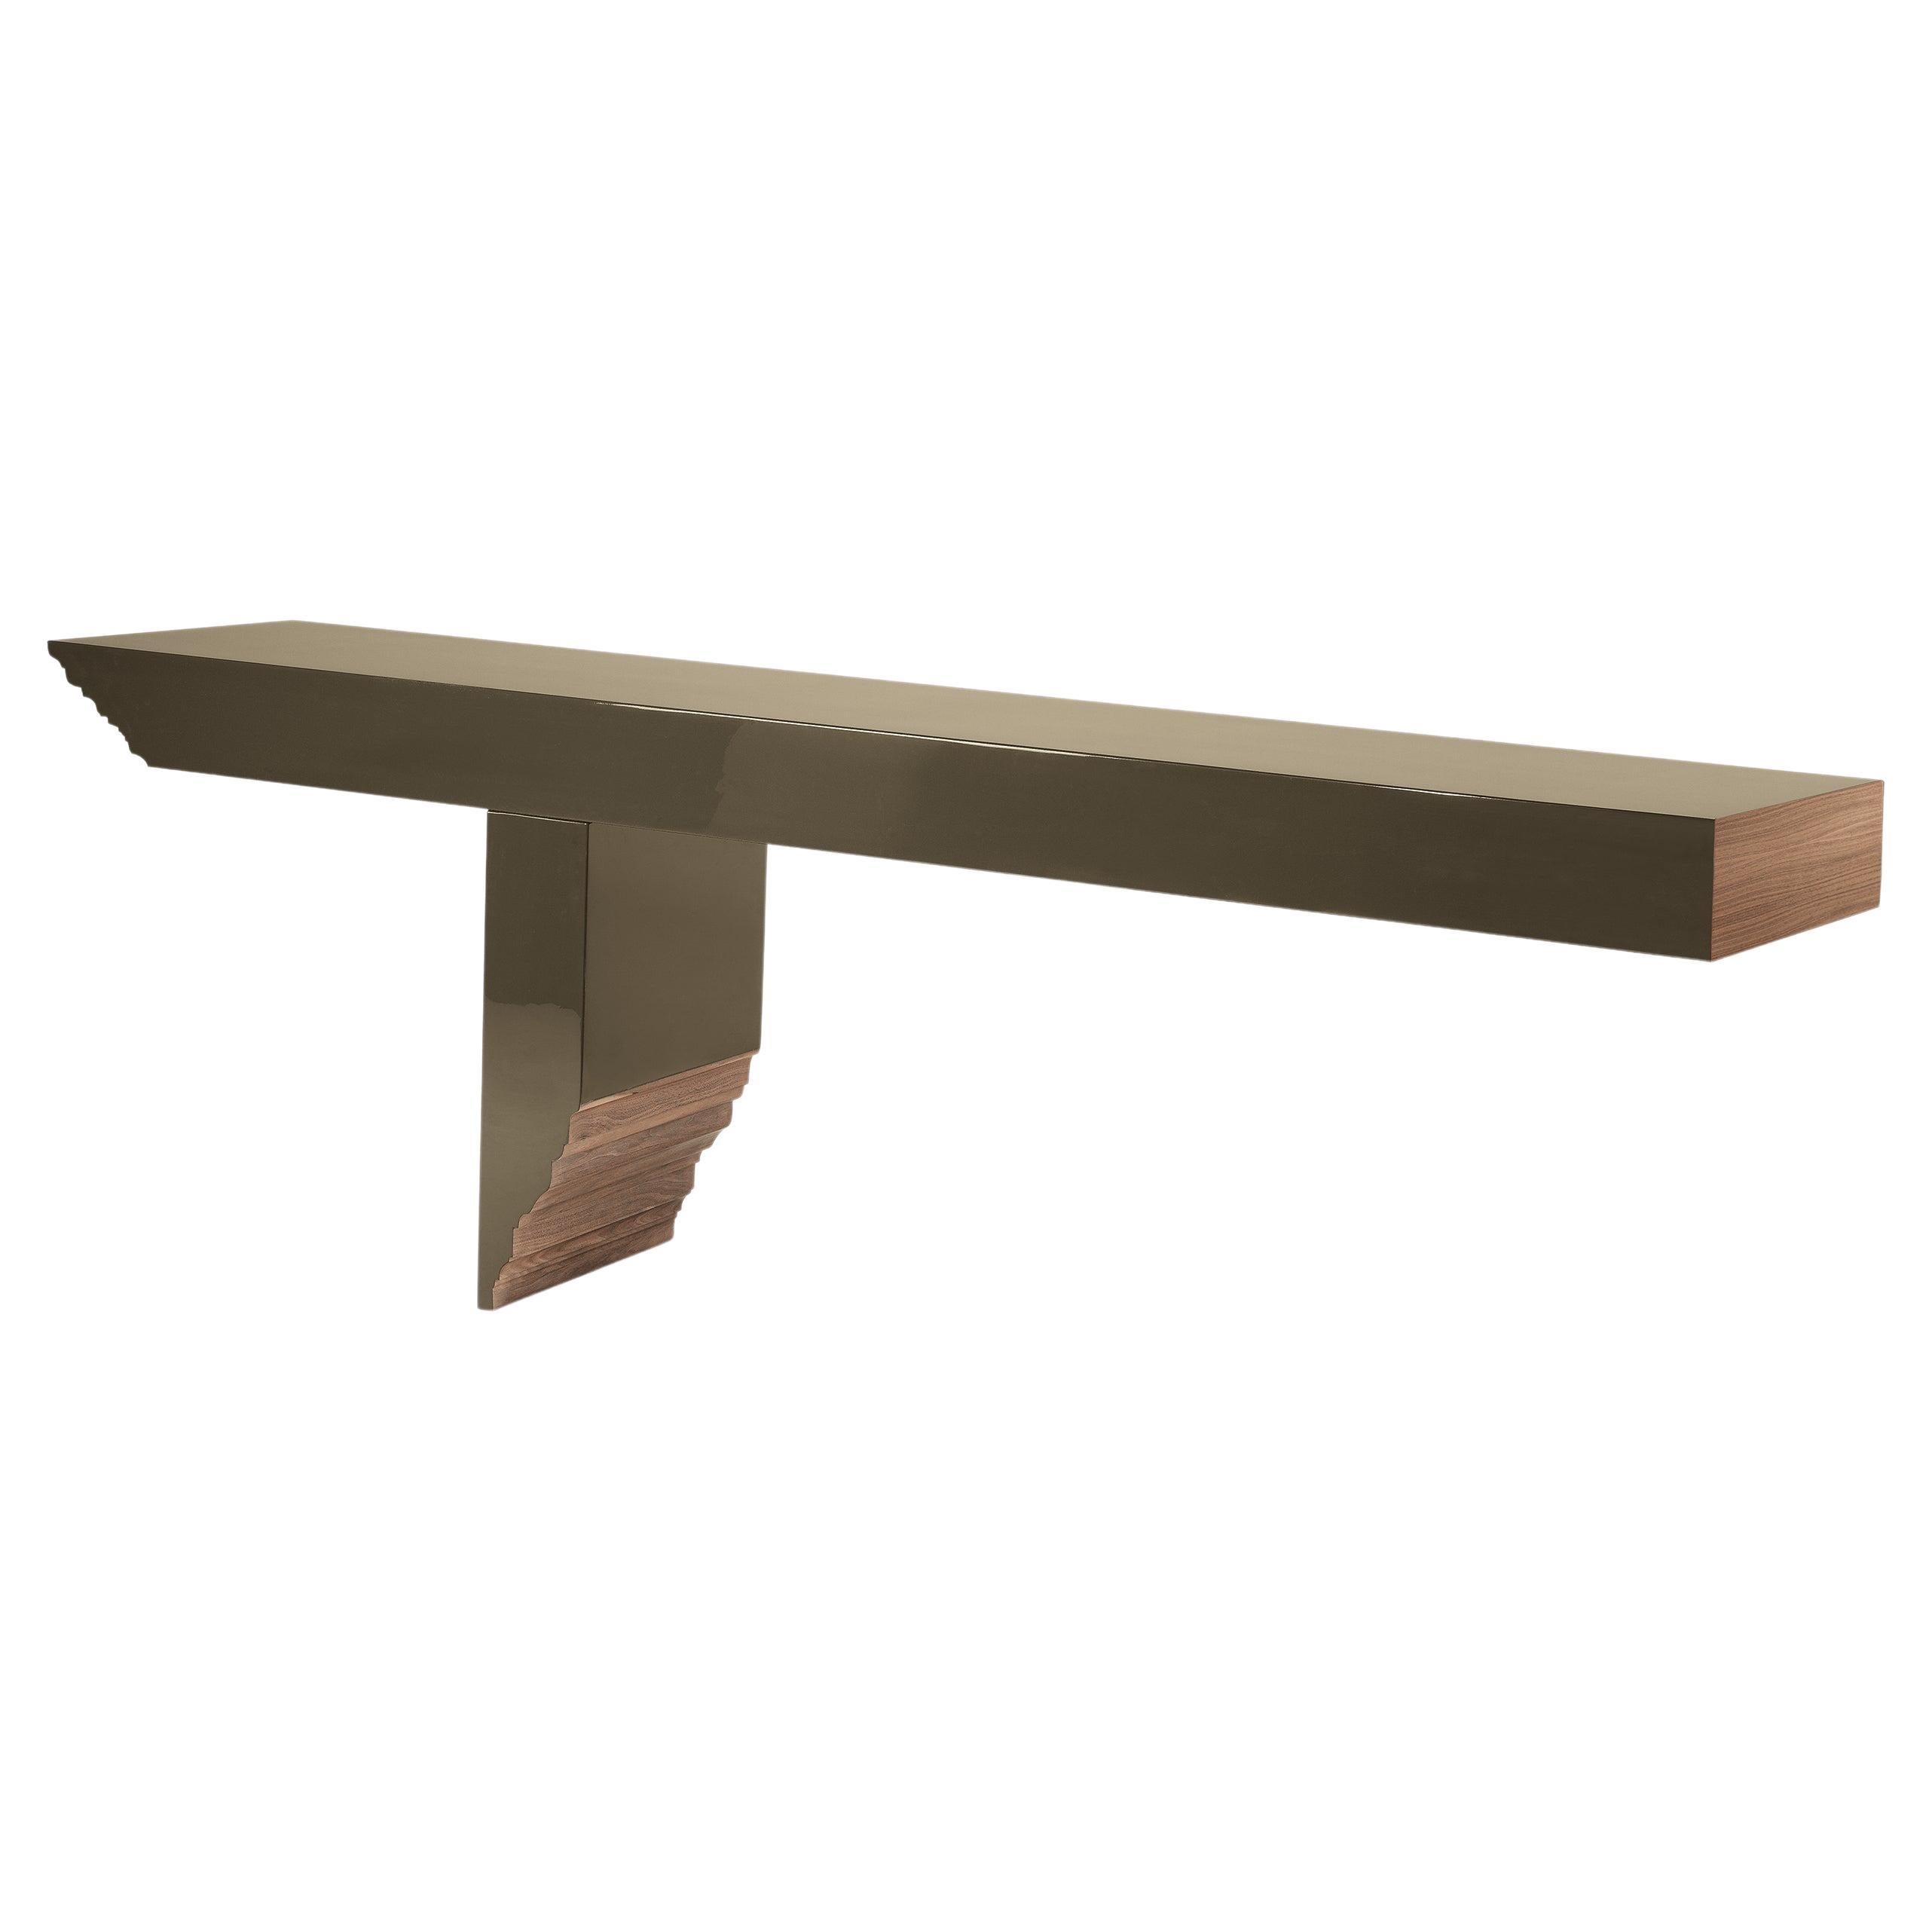 RI-TRATTO T-Shaped Console Table with Solid Walnut Moldings by Storagemilano For Sale